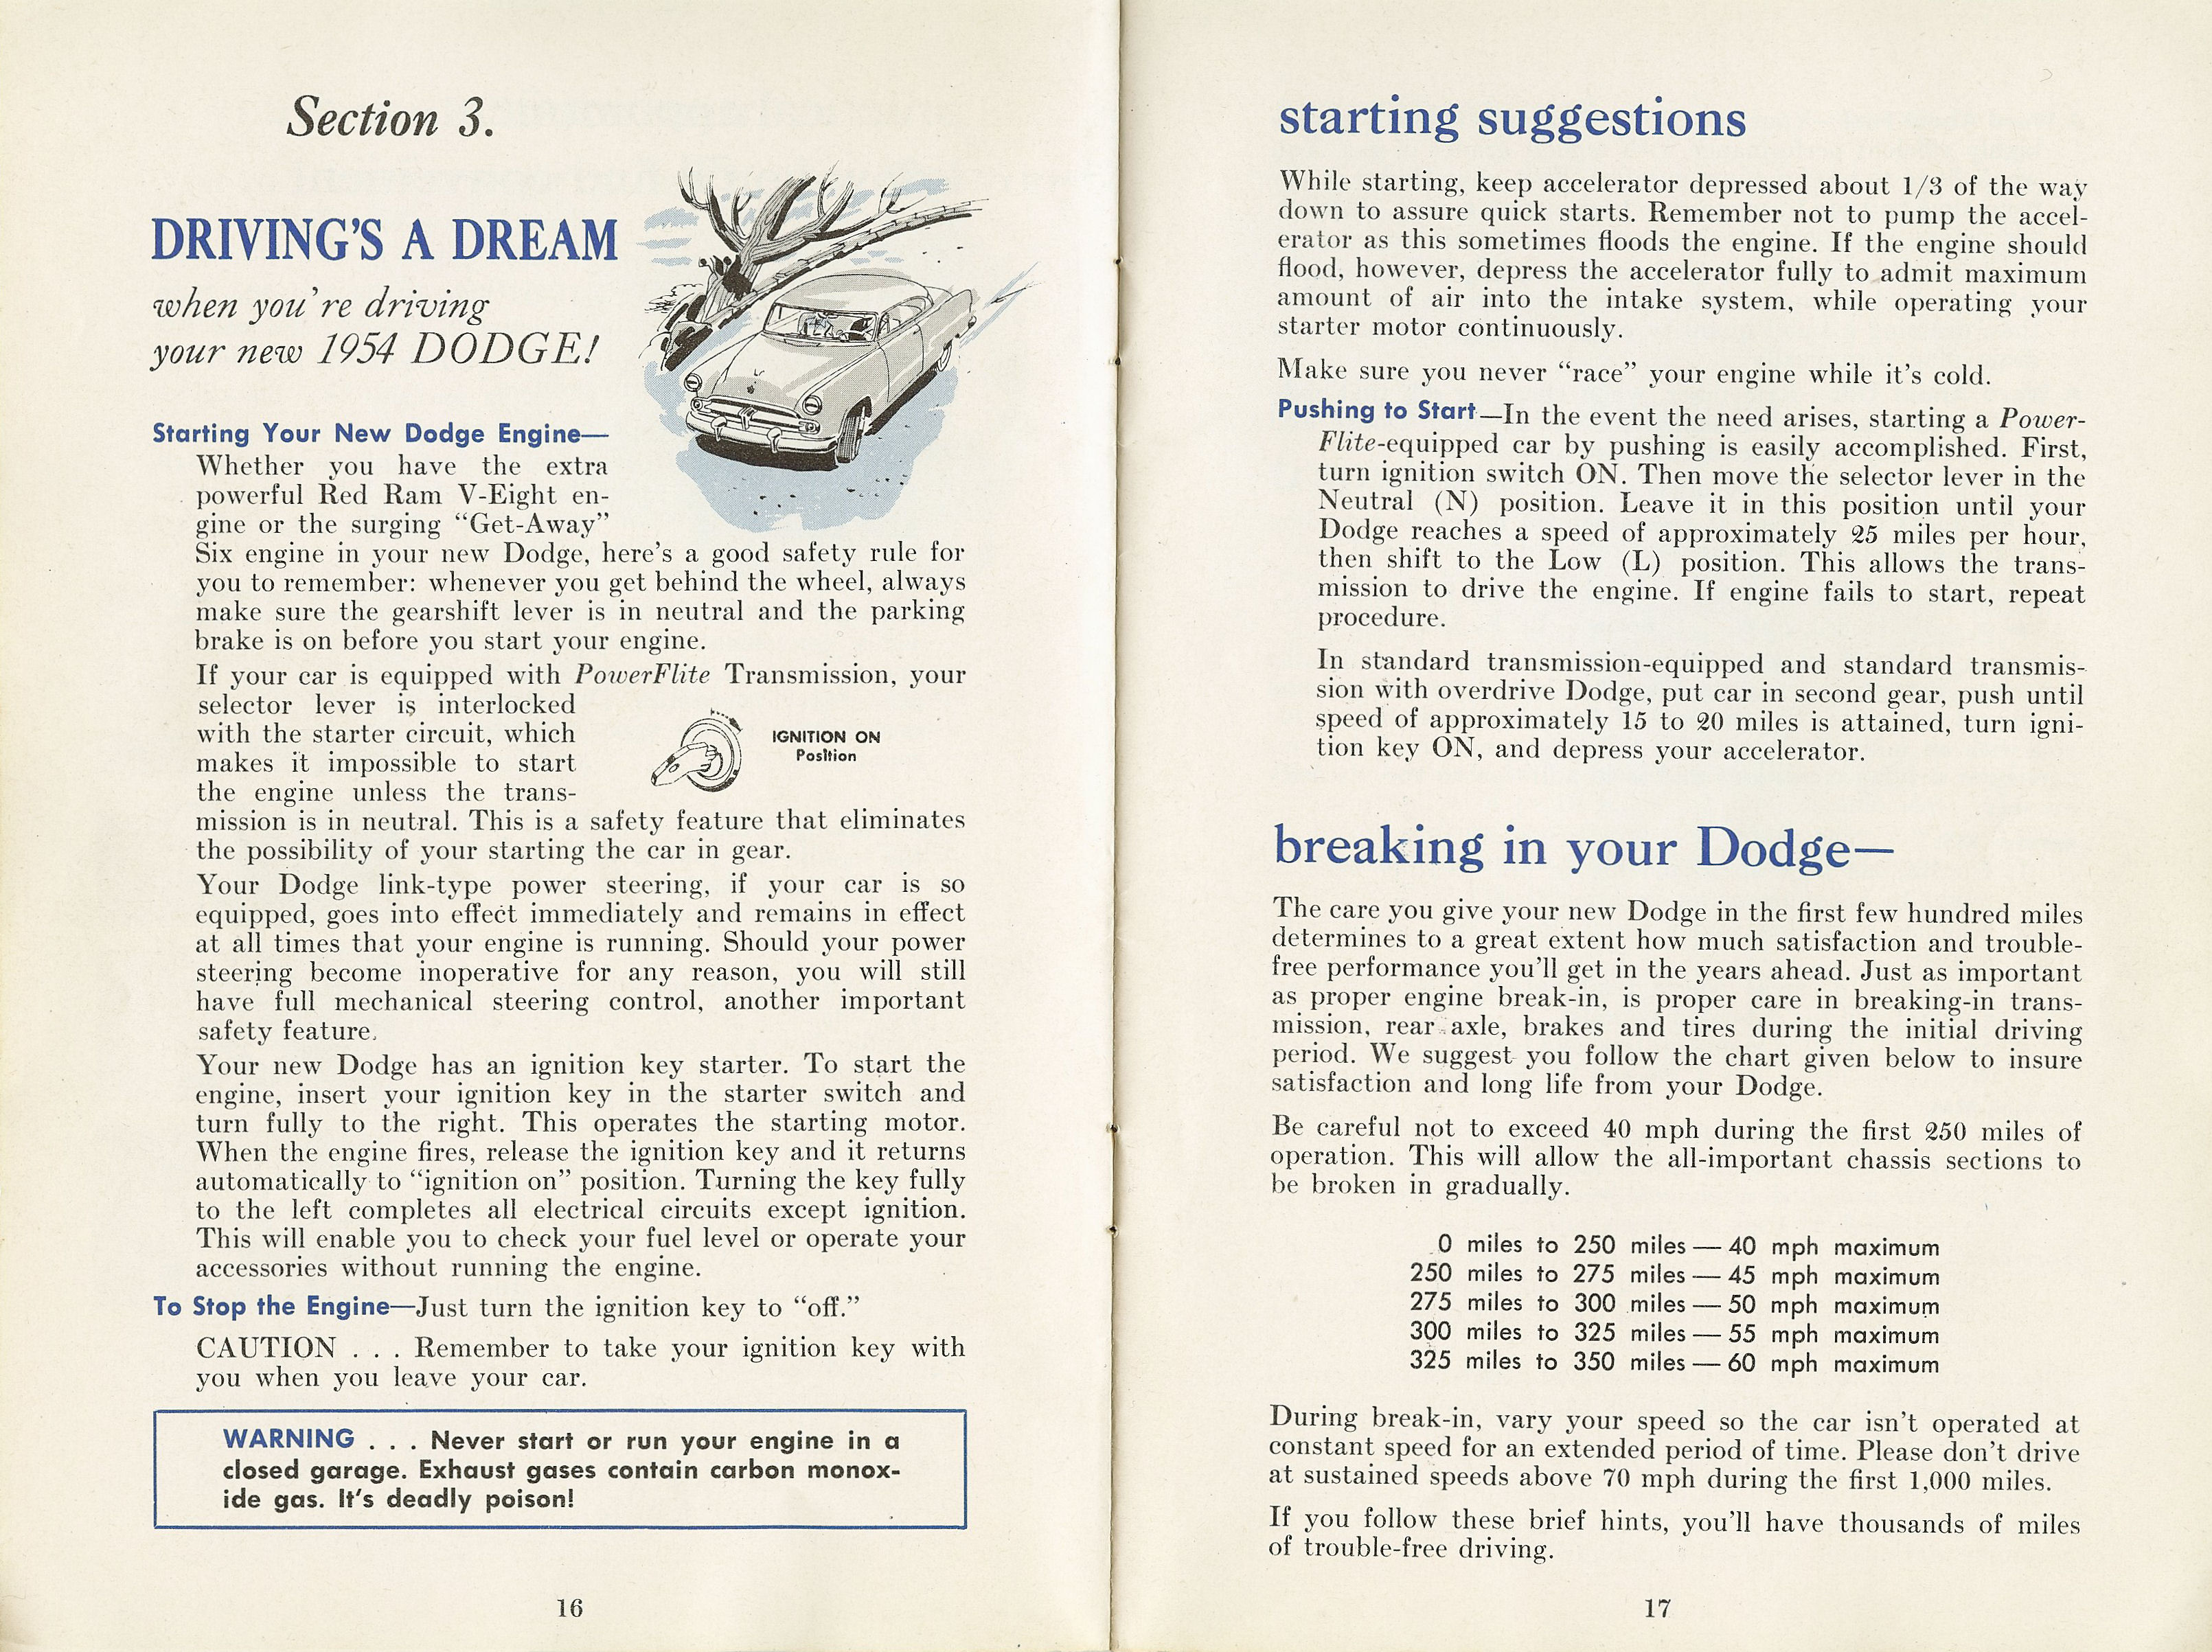 1954 Dodge Car Owners Manual Page 30